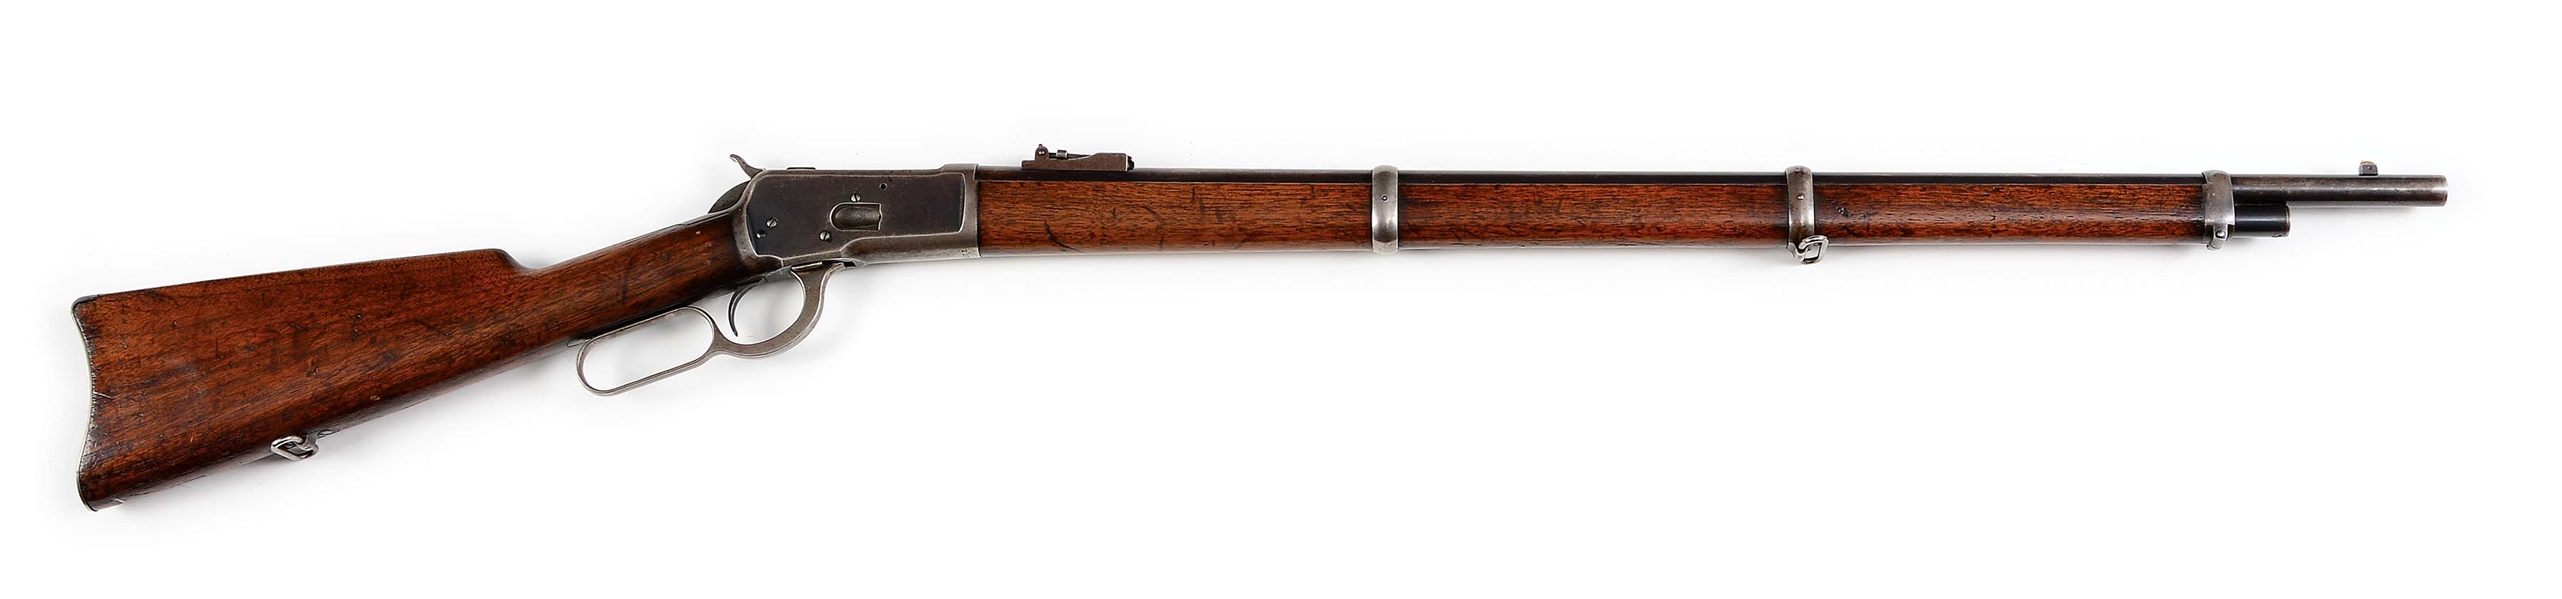 (C) RARE AND DESIRABLE WINCHESTER MODEL 1892 MUSKET (1902).